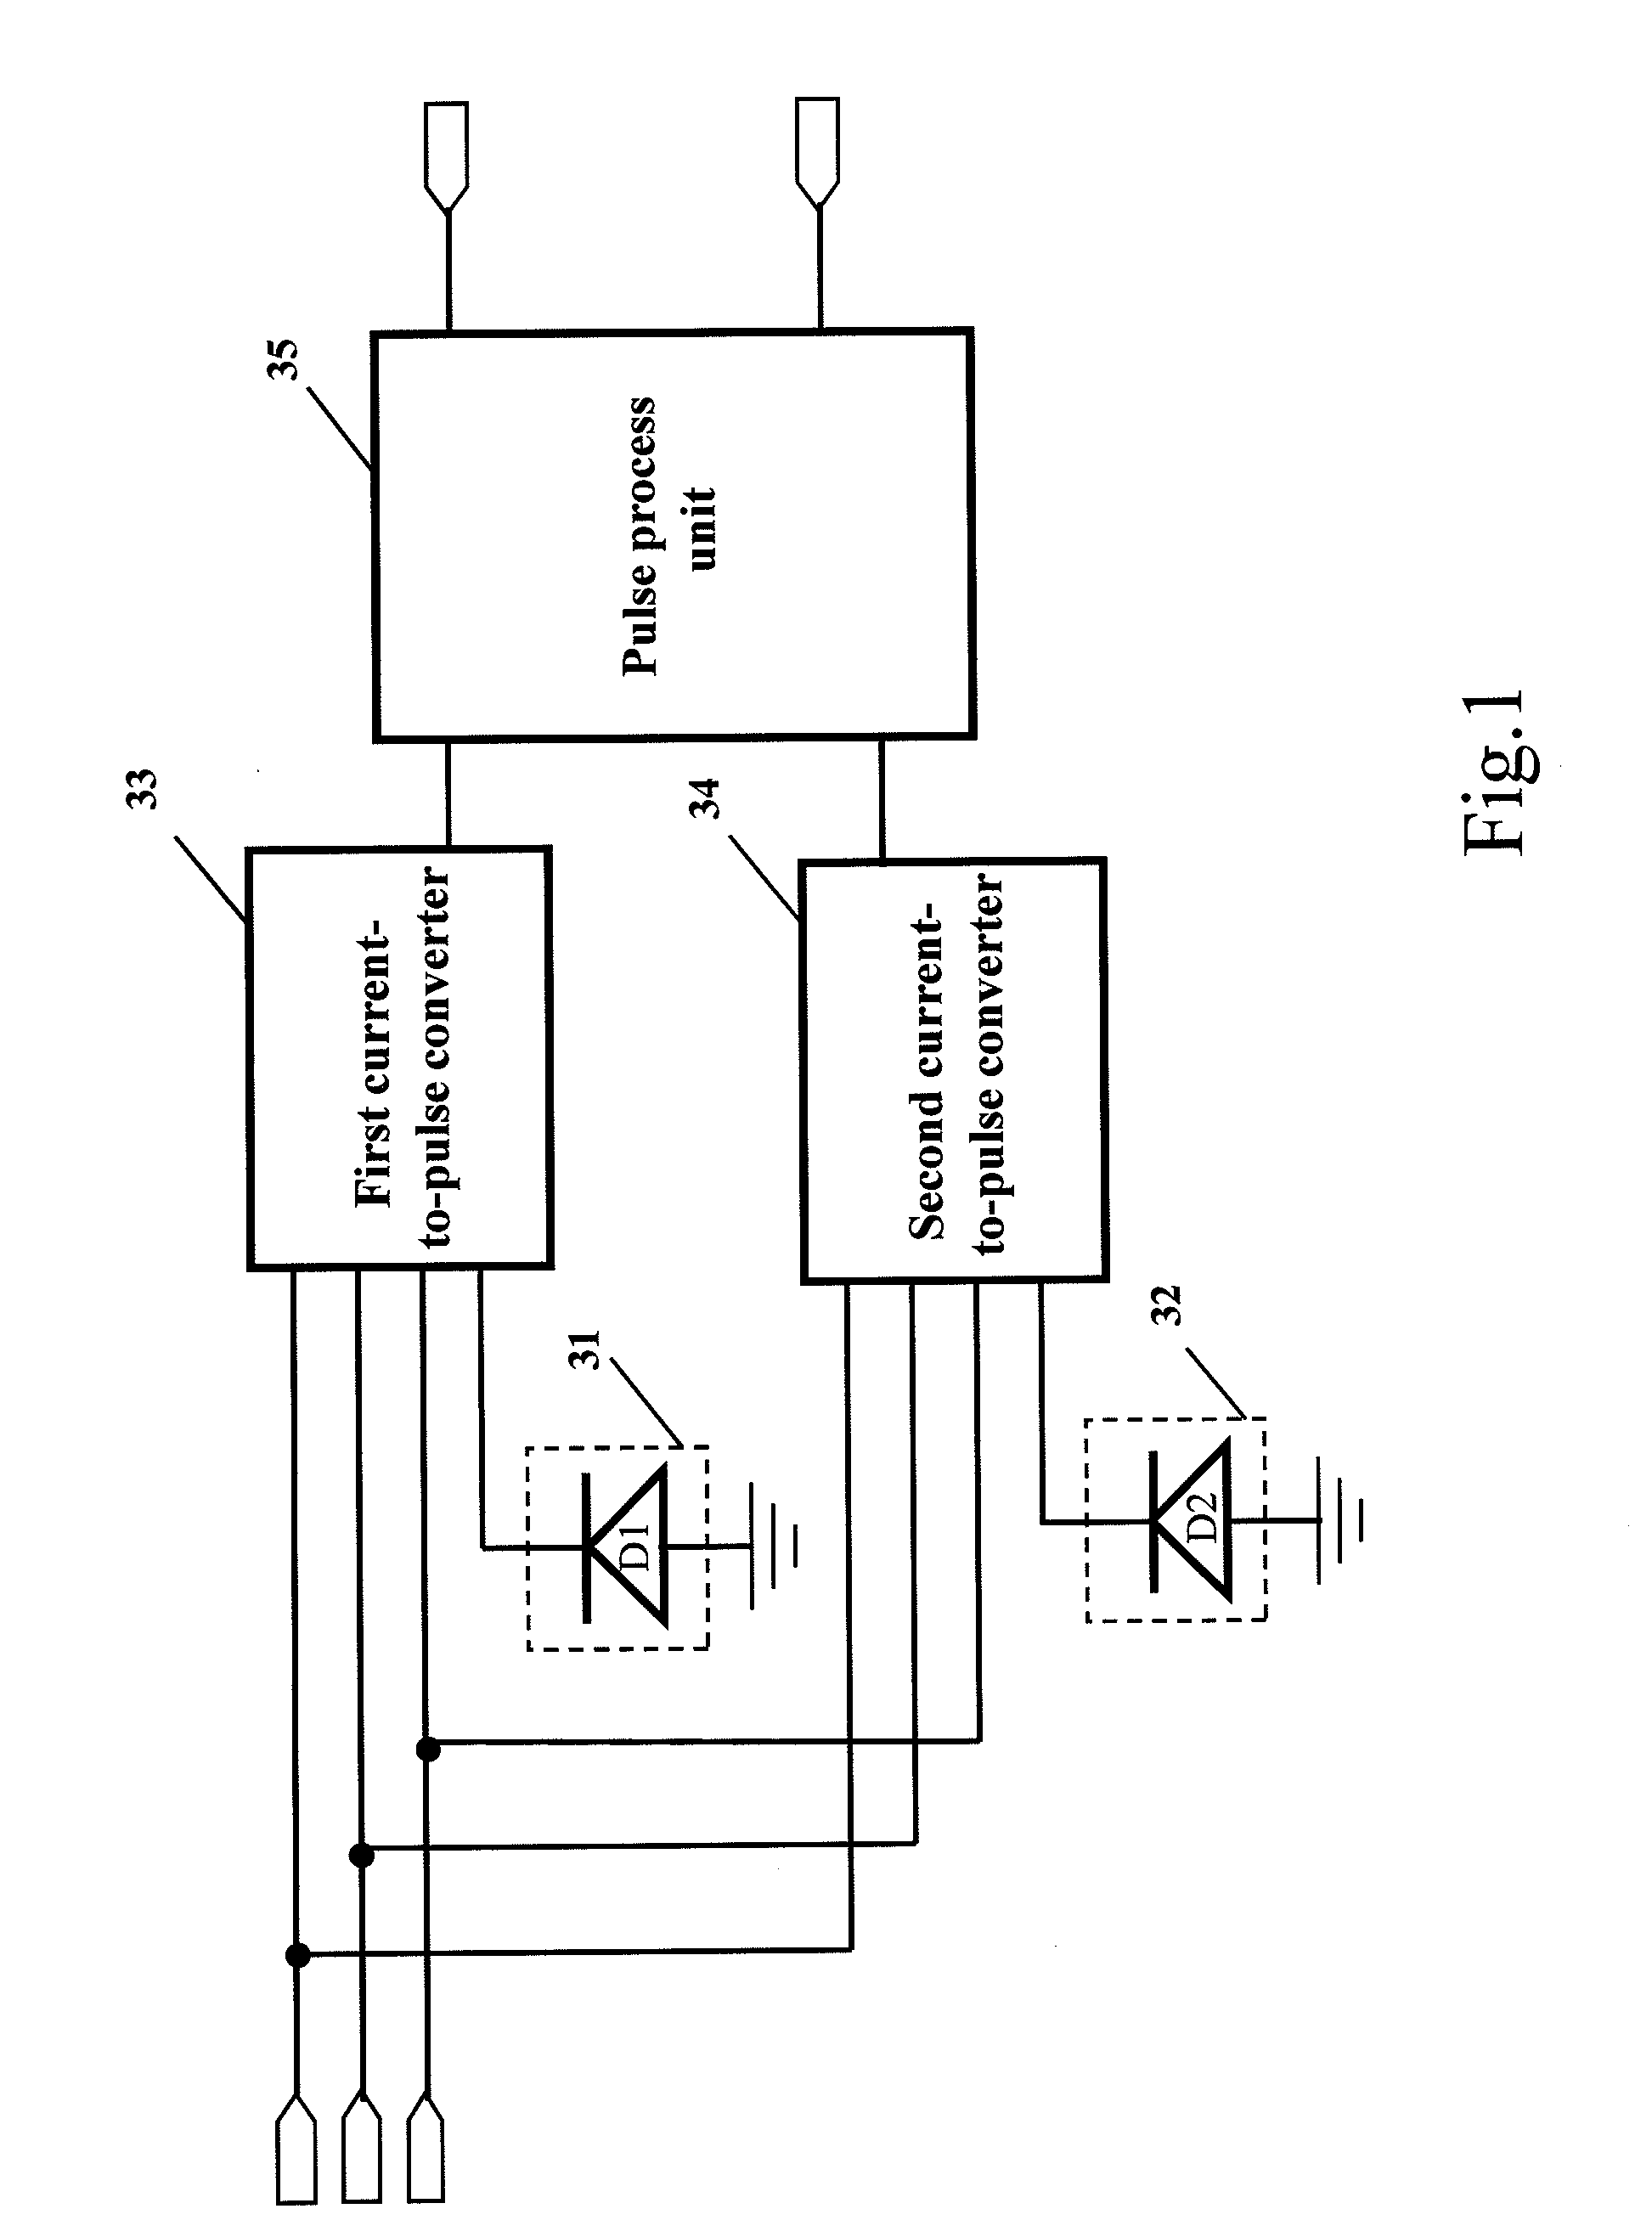 Photosensor device with dark current cancellation